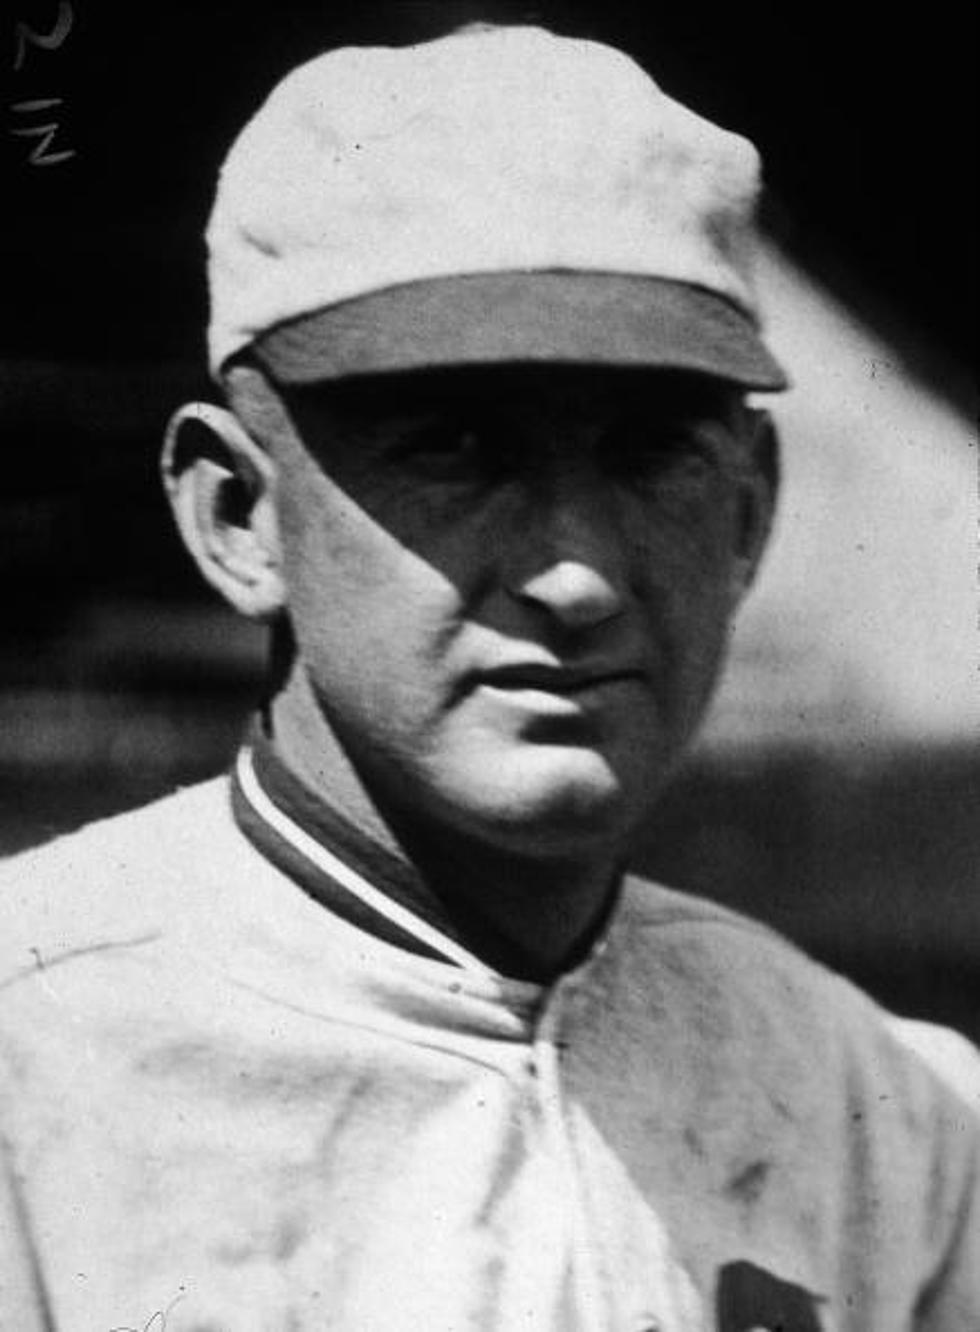 Chicago Black Sox Scandal – Dale’s Daily Data